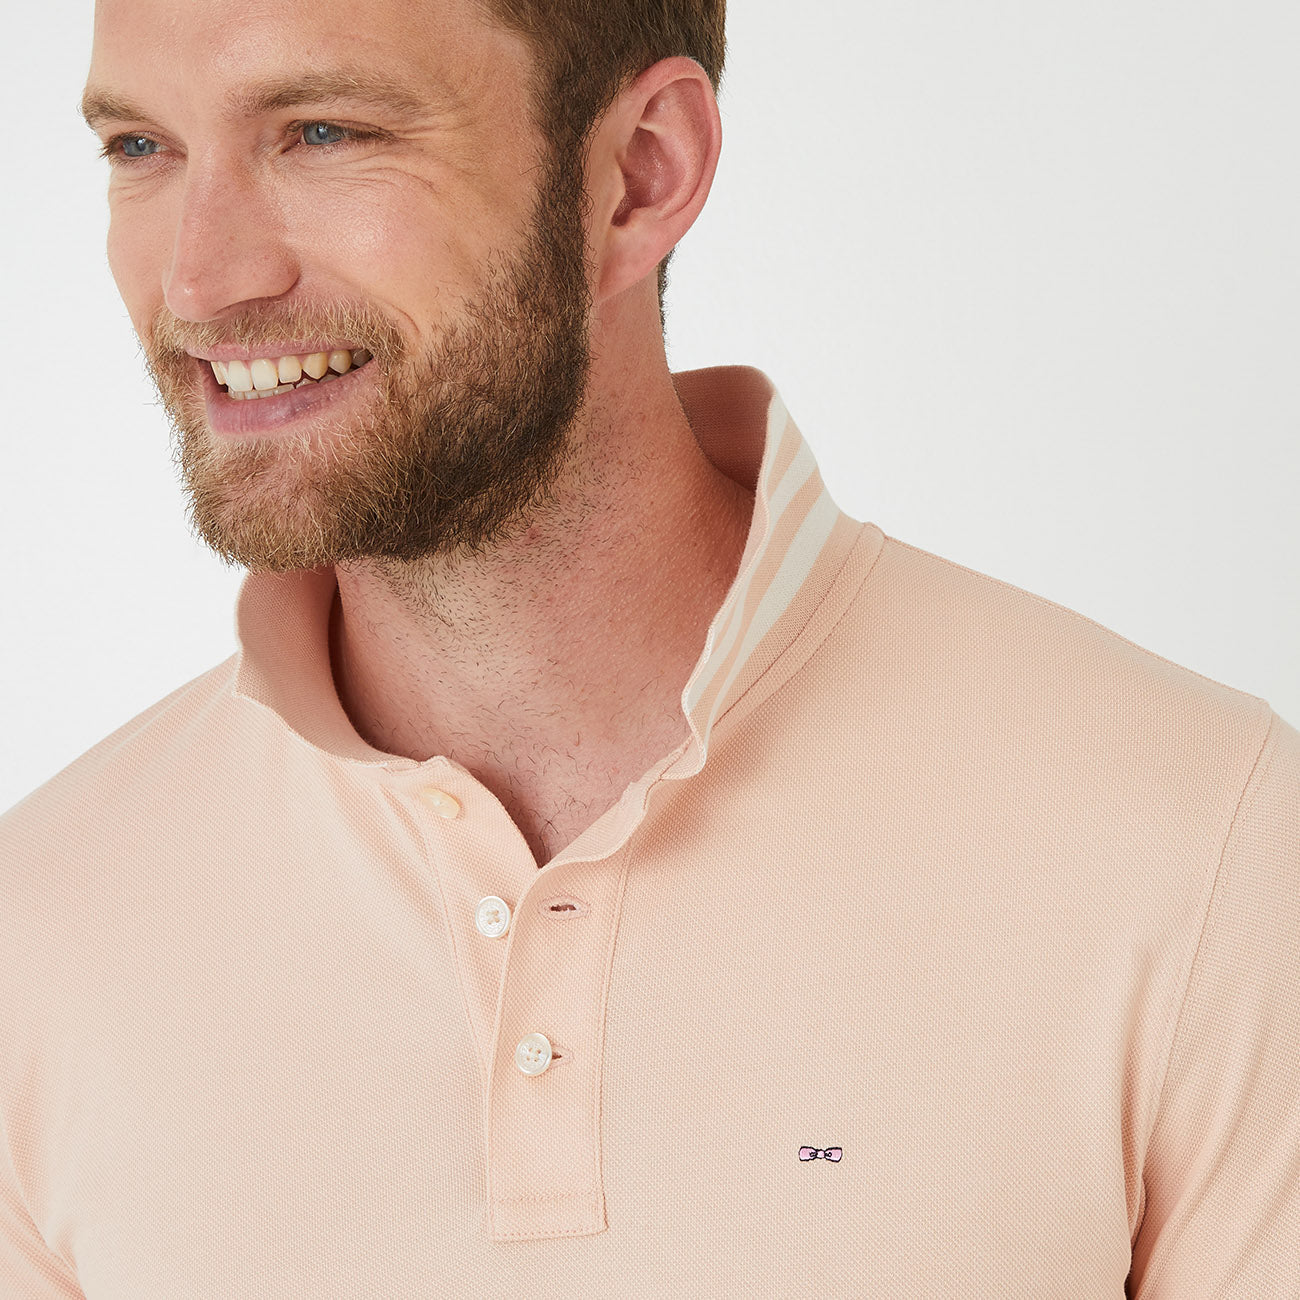 Eden Park Classic Light Peach Poloshirt with Sports Collar. Short sleeves and a classic collar poloshirt made from soft cotton pique. Available at StylishGuy Menswear Boutique Dublin.